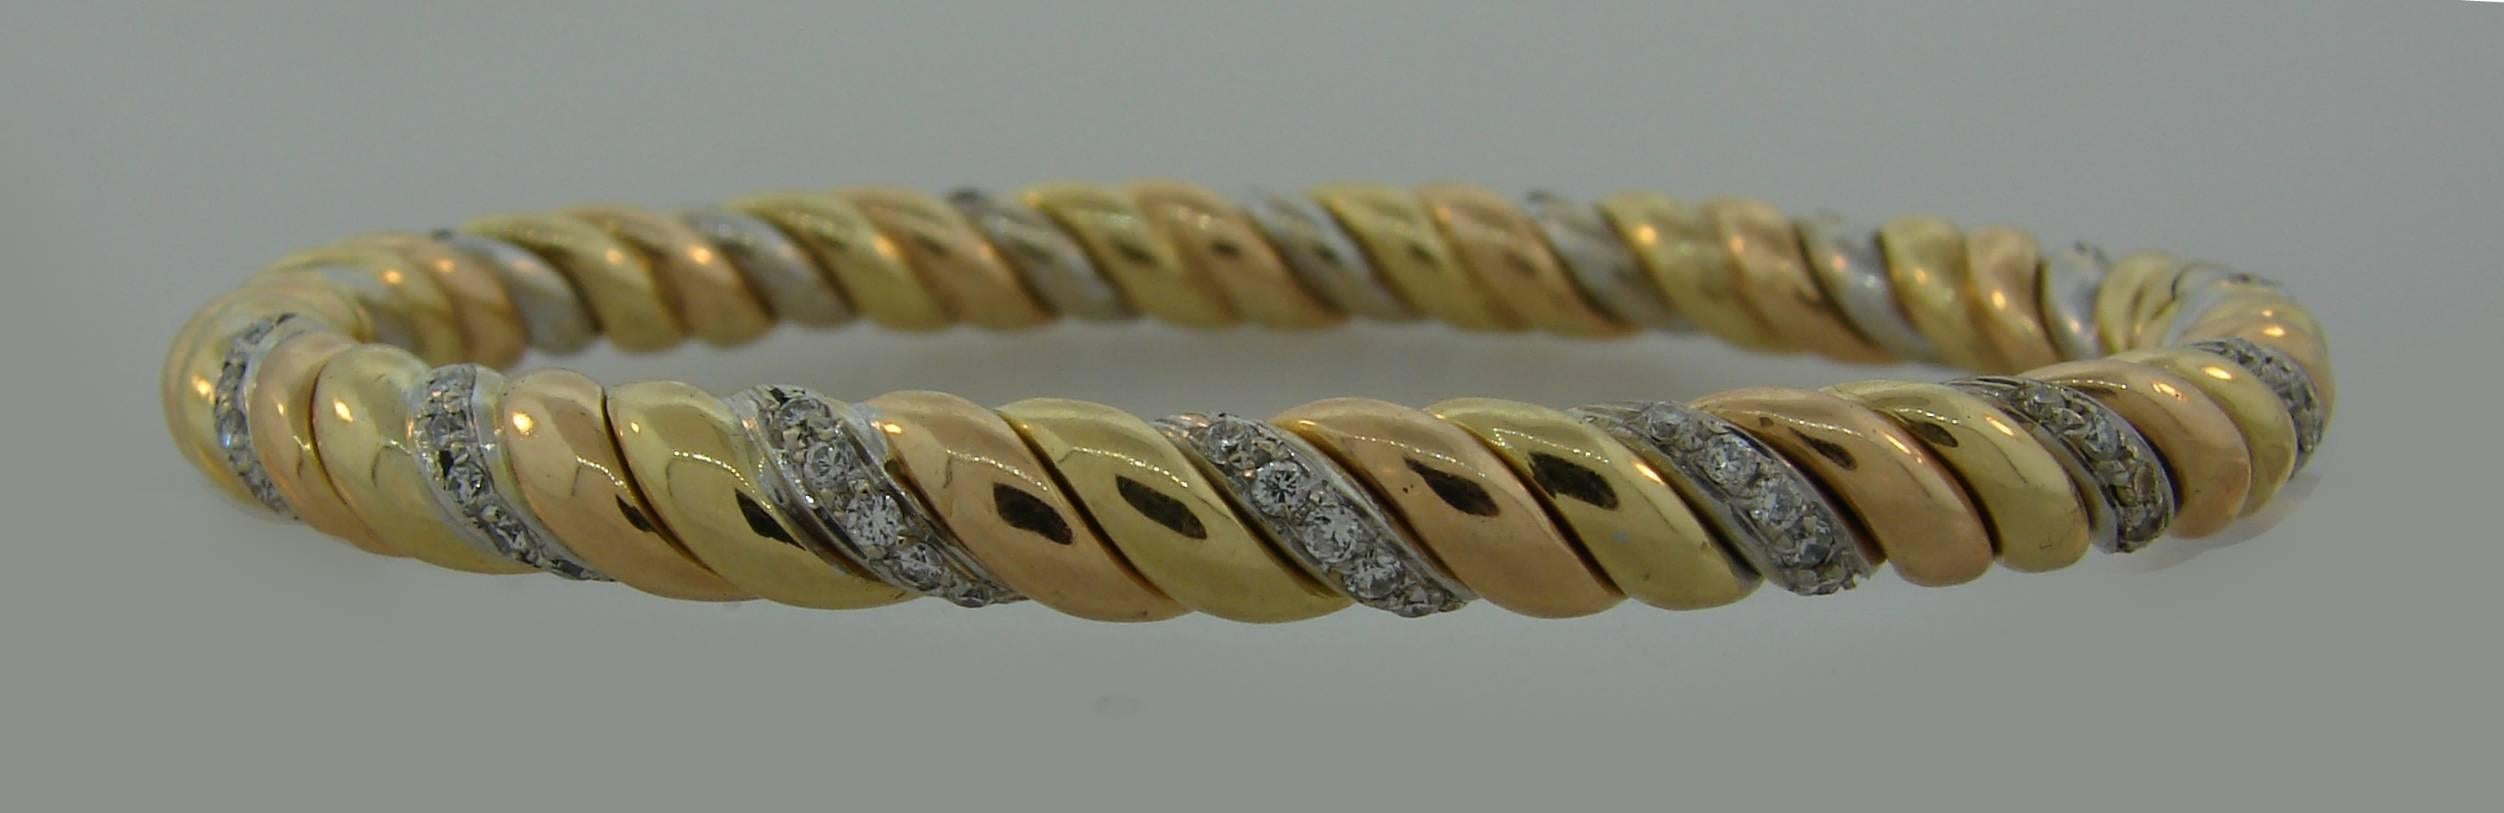 Elegant and wearable bracelet that is a great addition to your jewelry collection. Three-tone gold, white, yellow and rose, makes it practical and combined with any color jewelry that you have. The diamond twist makes the bracelet dressier and